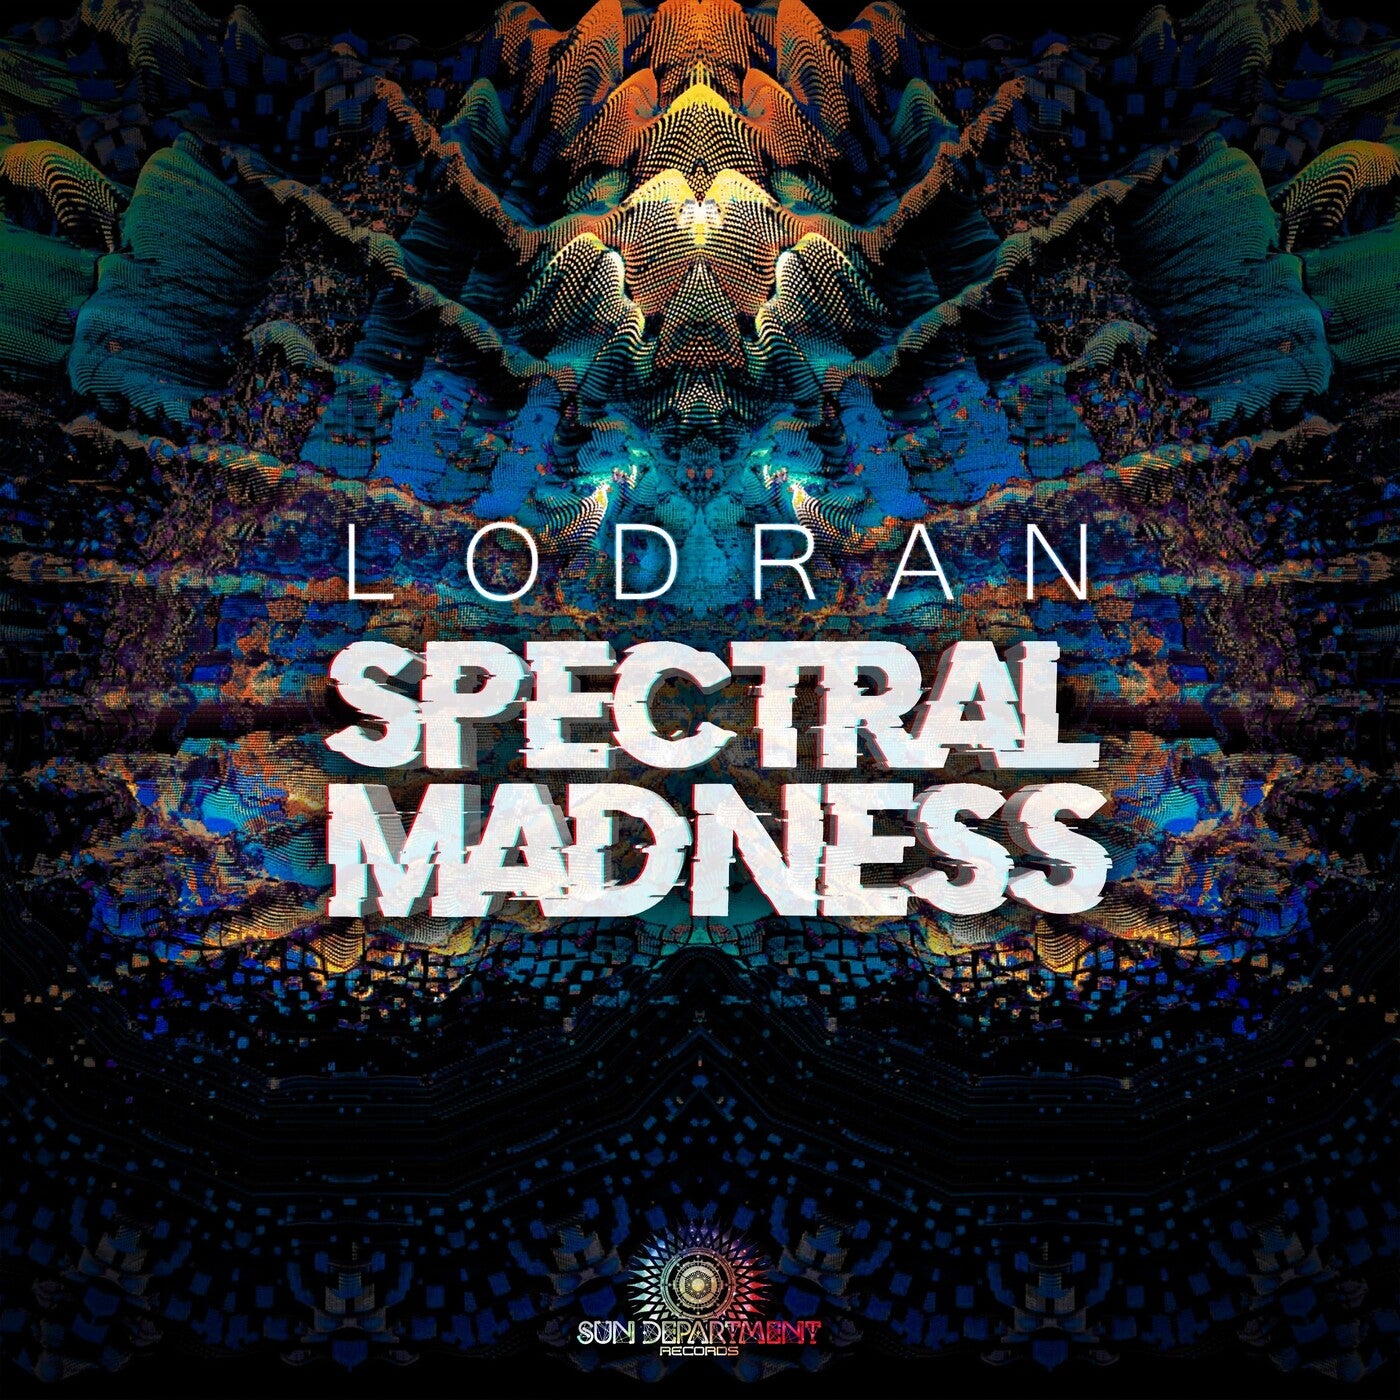 Spectral Madness